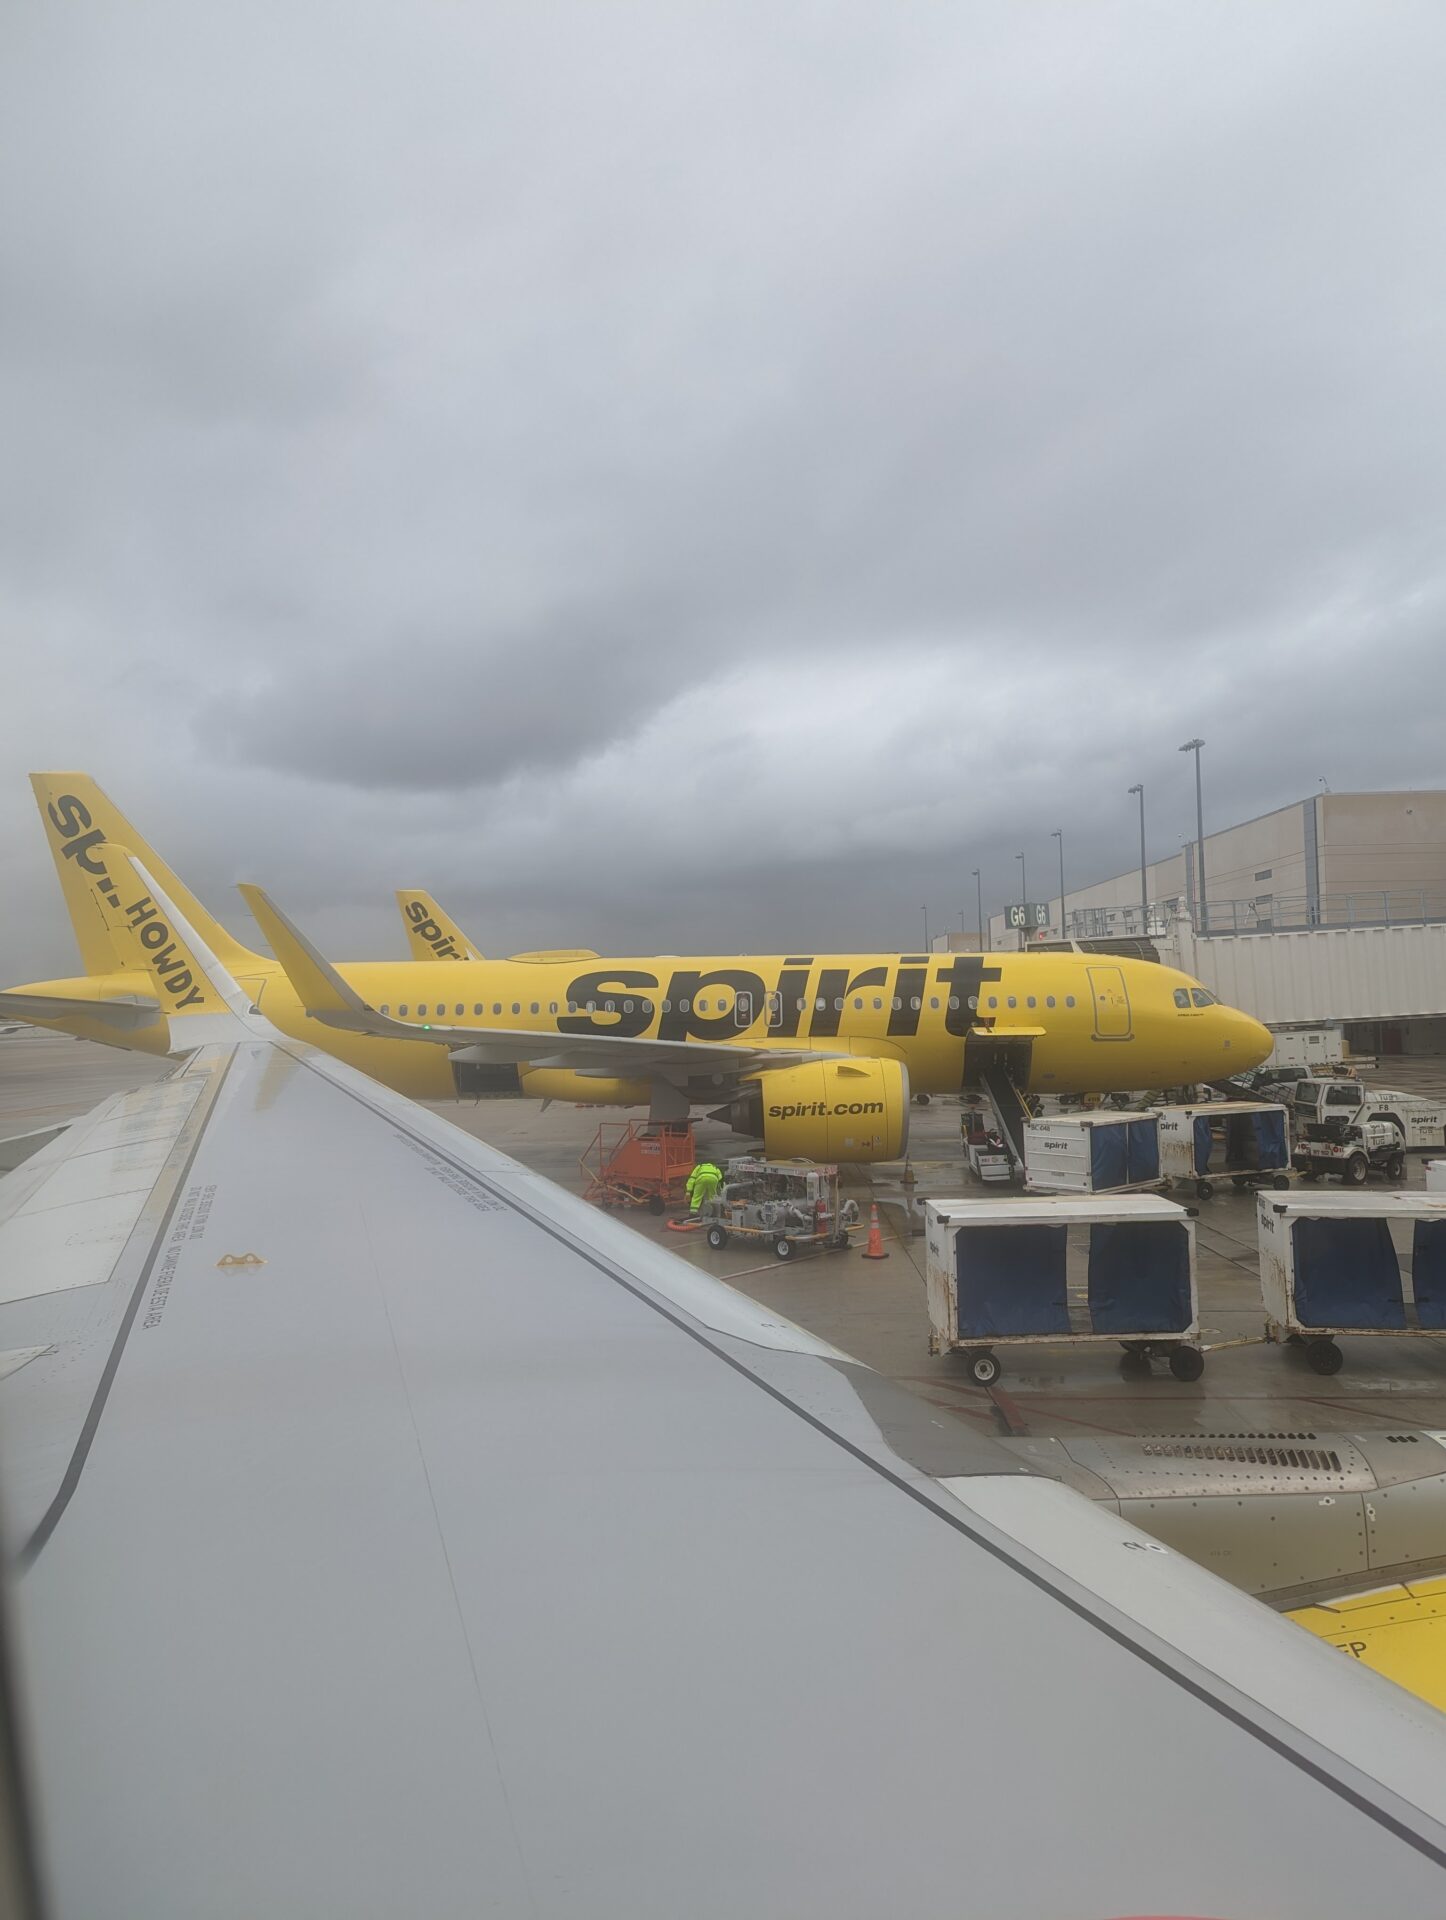 a yellow airplane parked at an airport